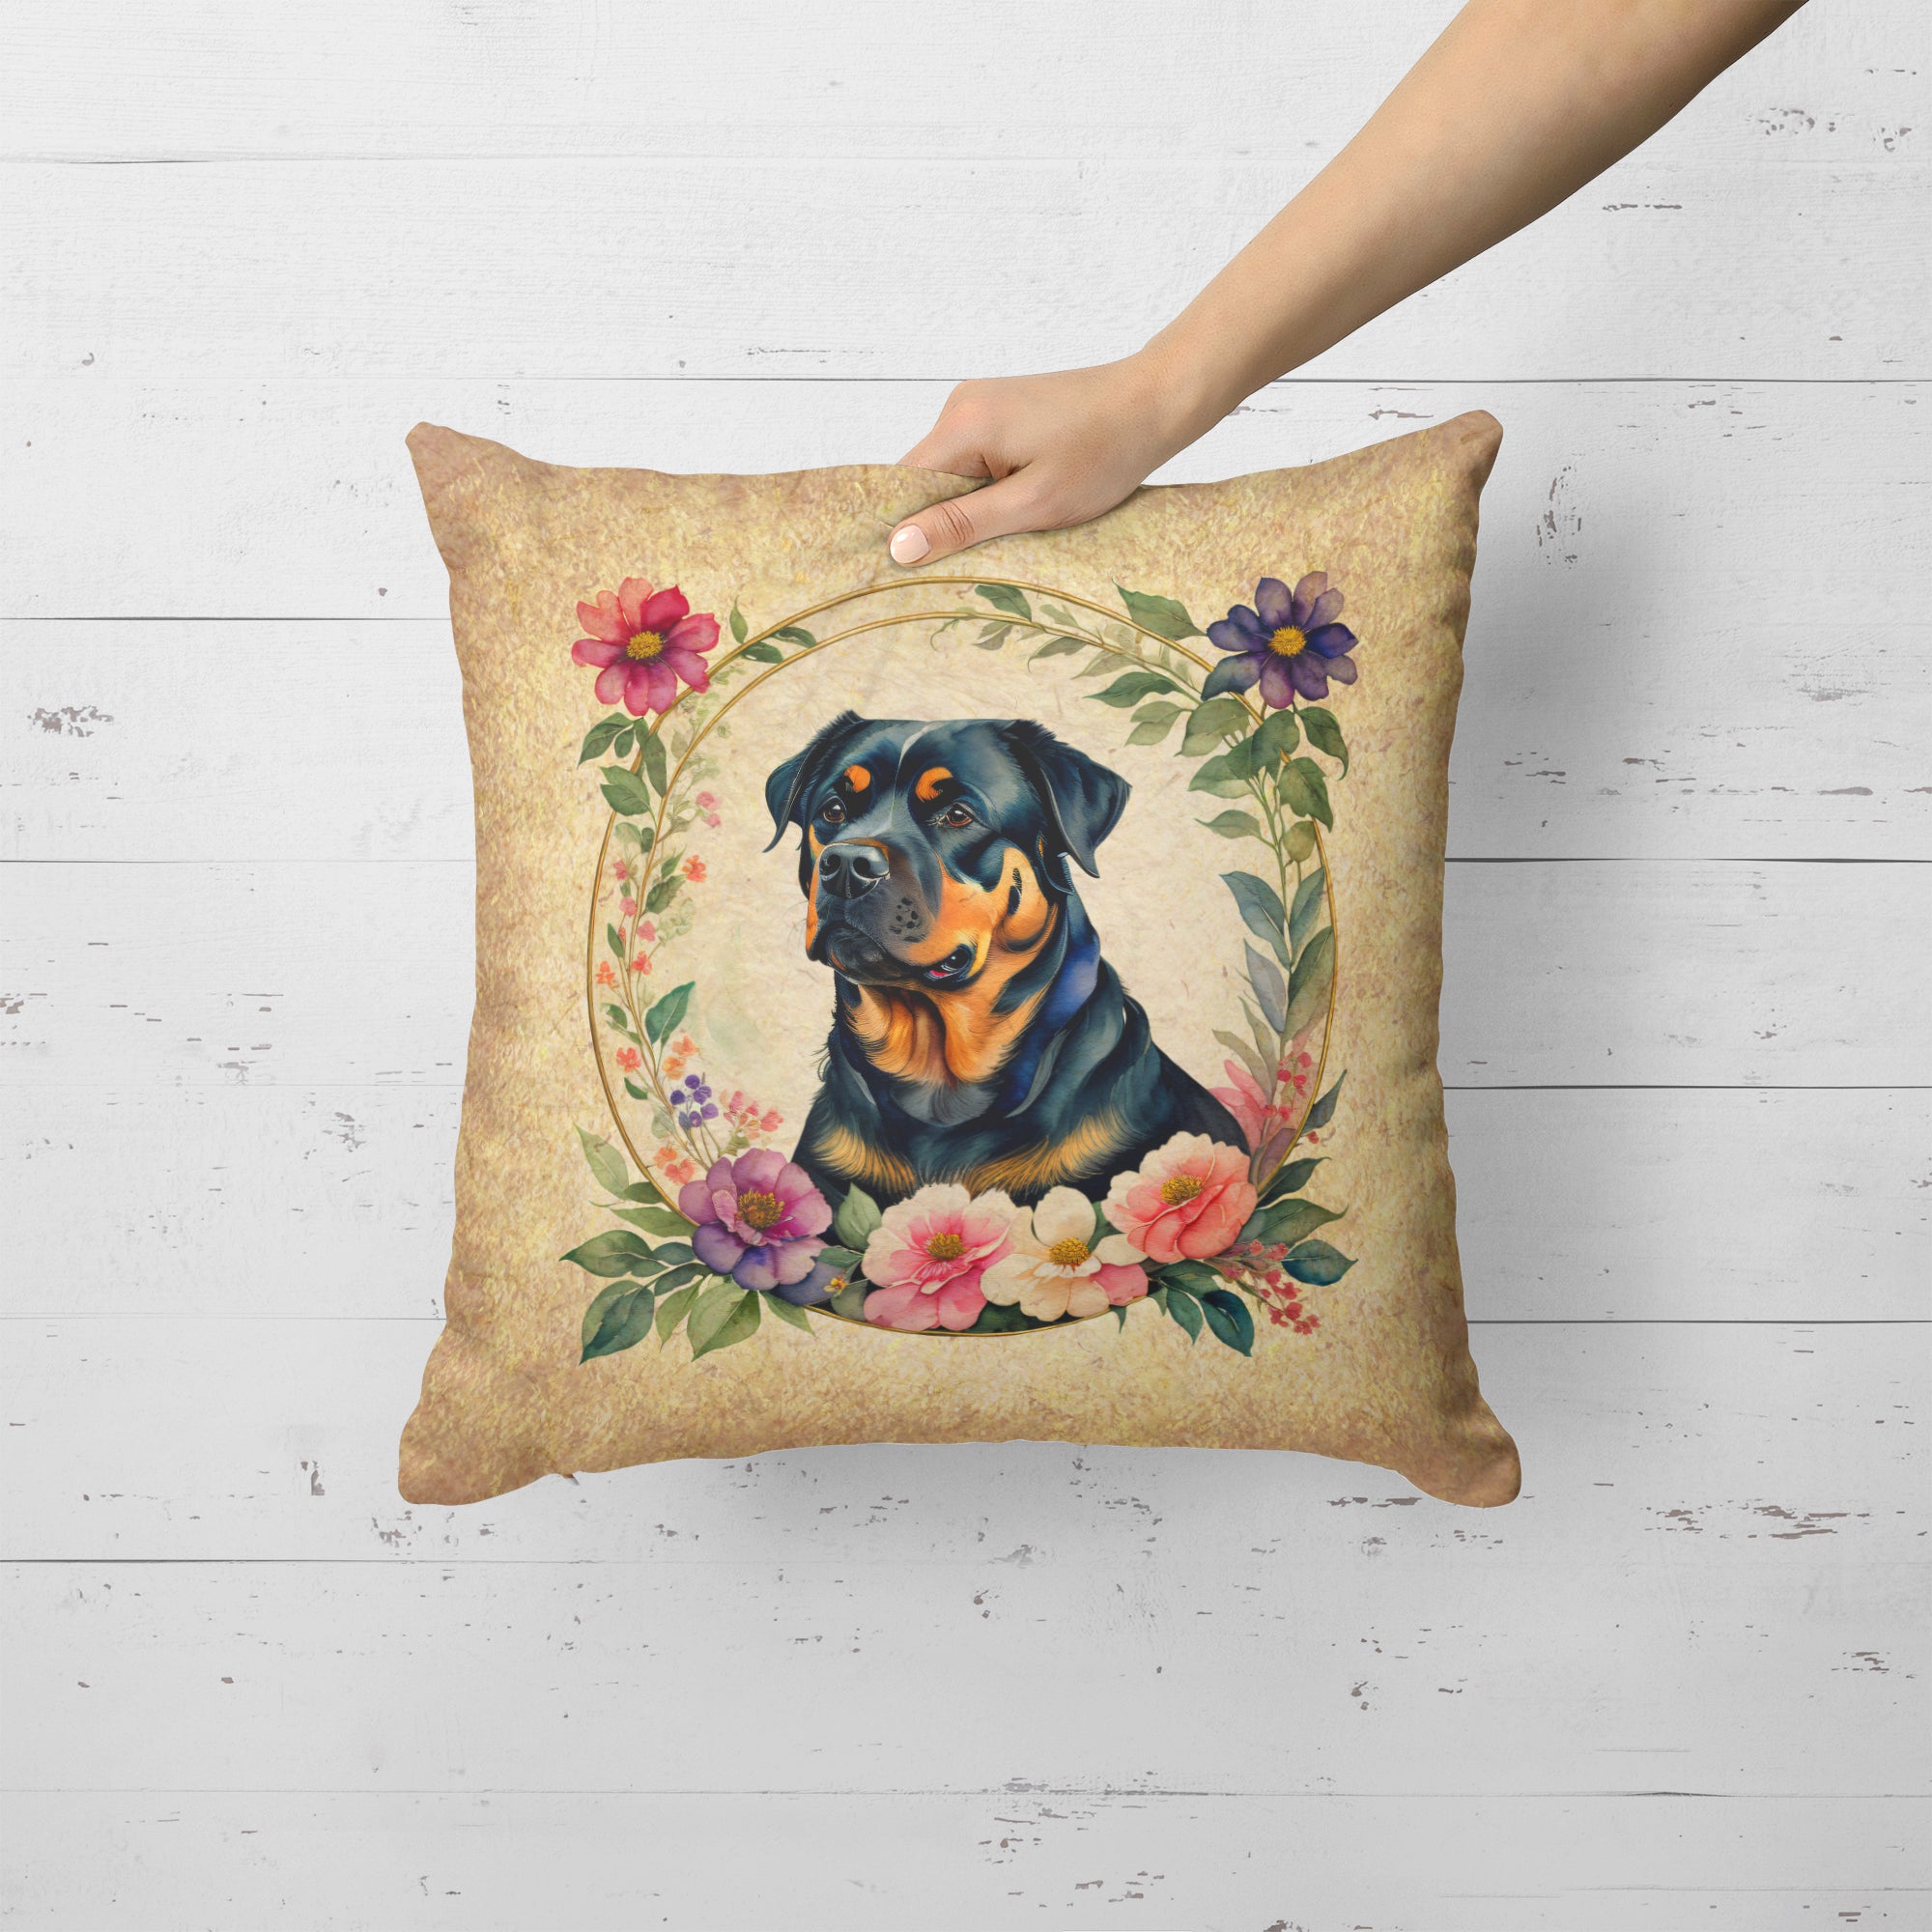 Buy this Rottweiler and Flowers Fabric Decorative Pillow